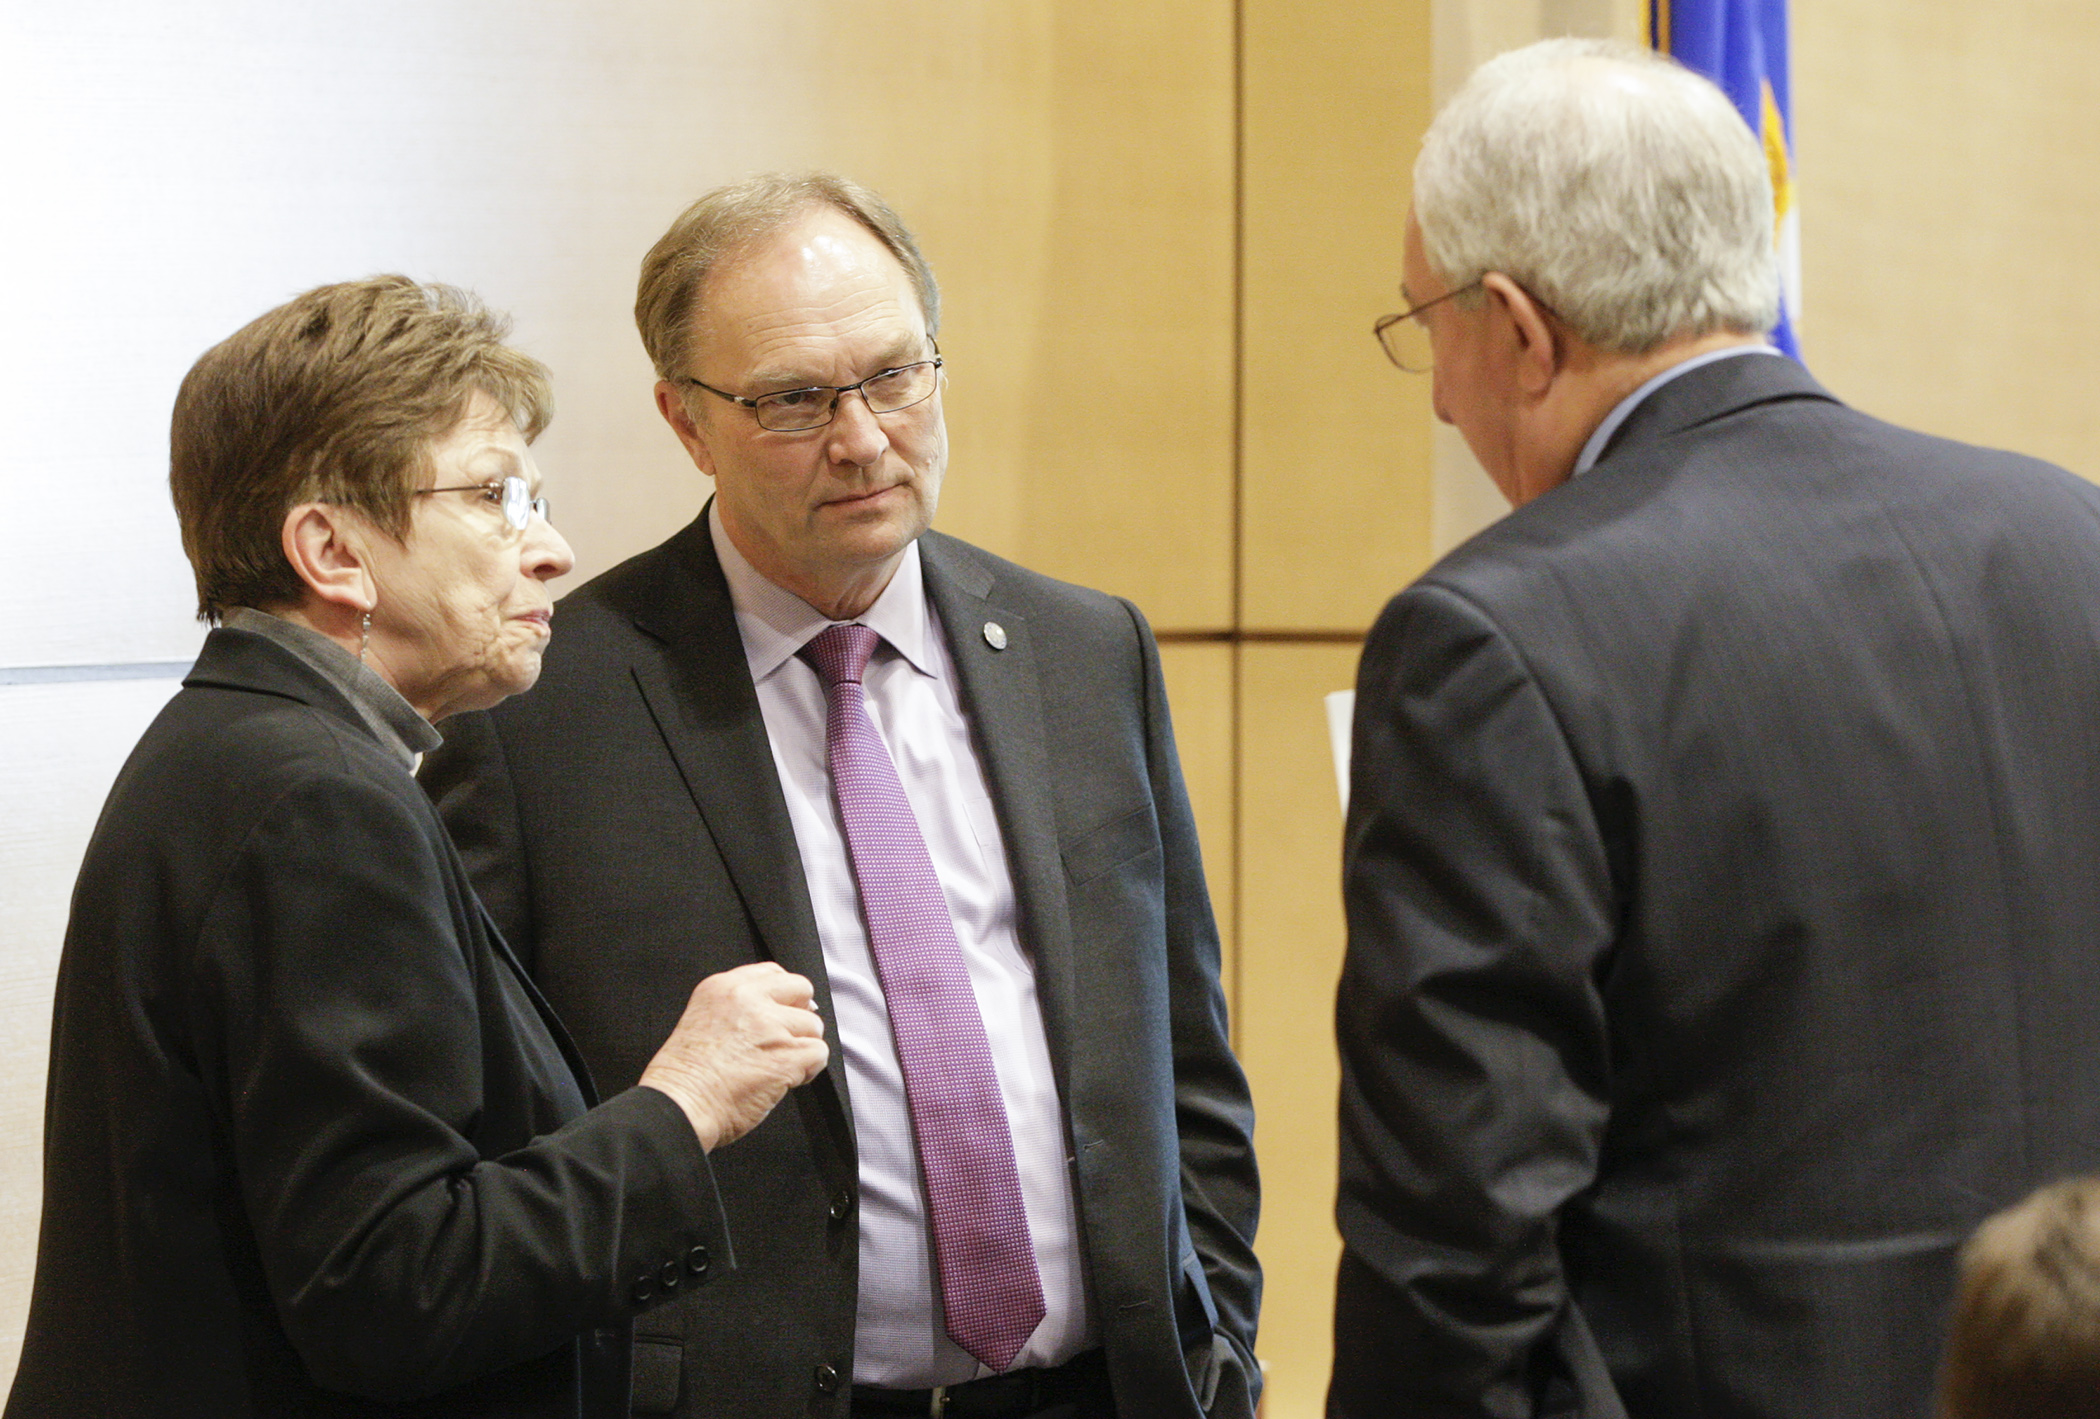 Rep. Paul Torkelson, center, and Rep. Alice Hausman confer with Sen. LeRoy Stumpf before a May 21 afternoon meeting of the capital investment conference committee. House Photography file photo